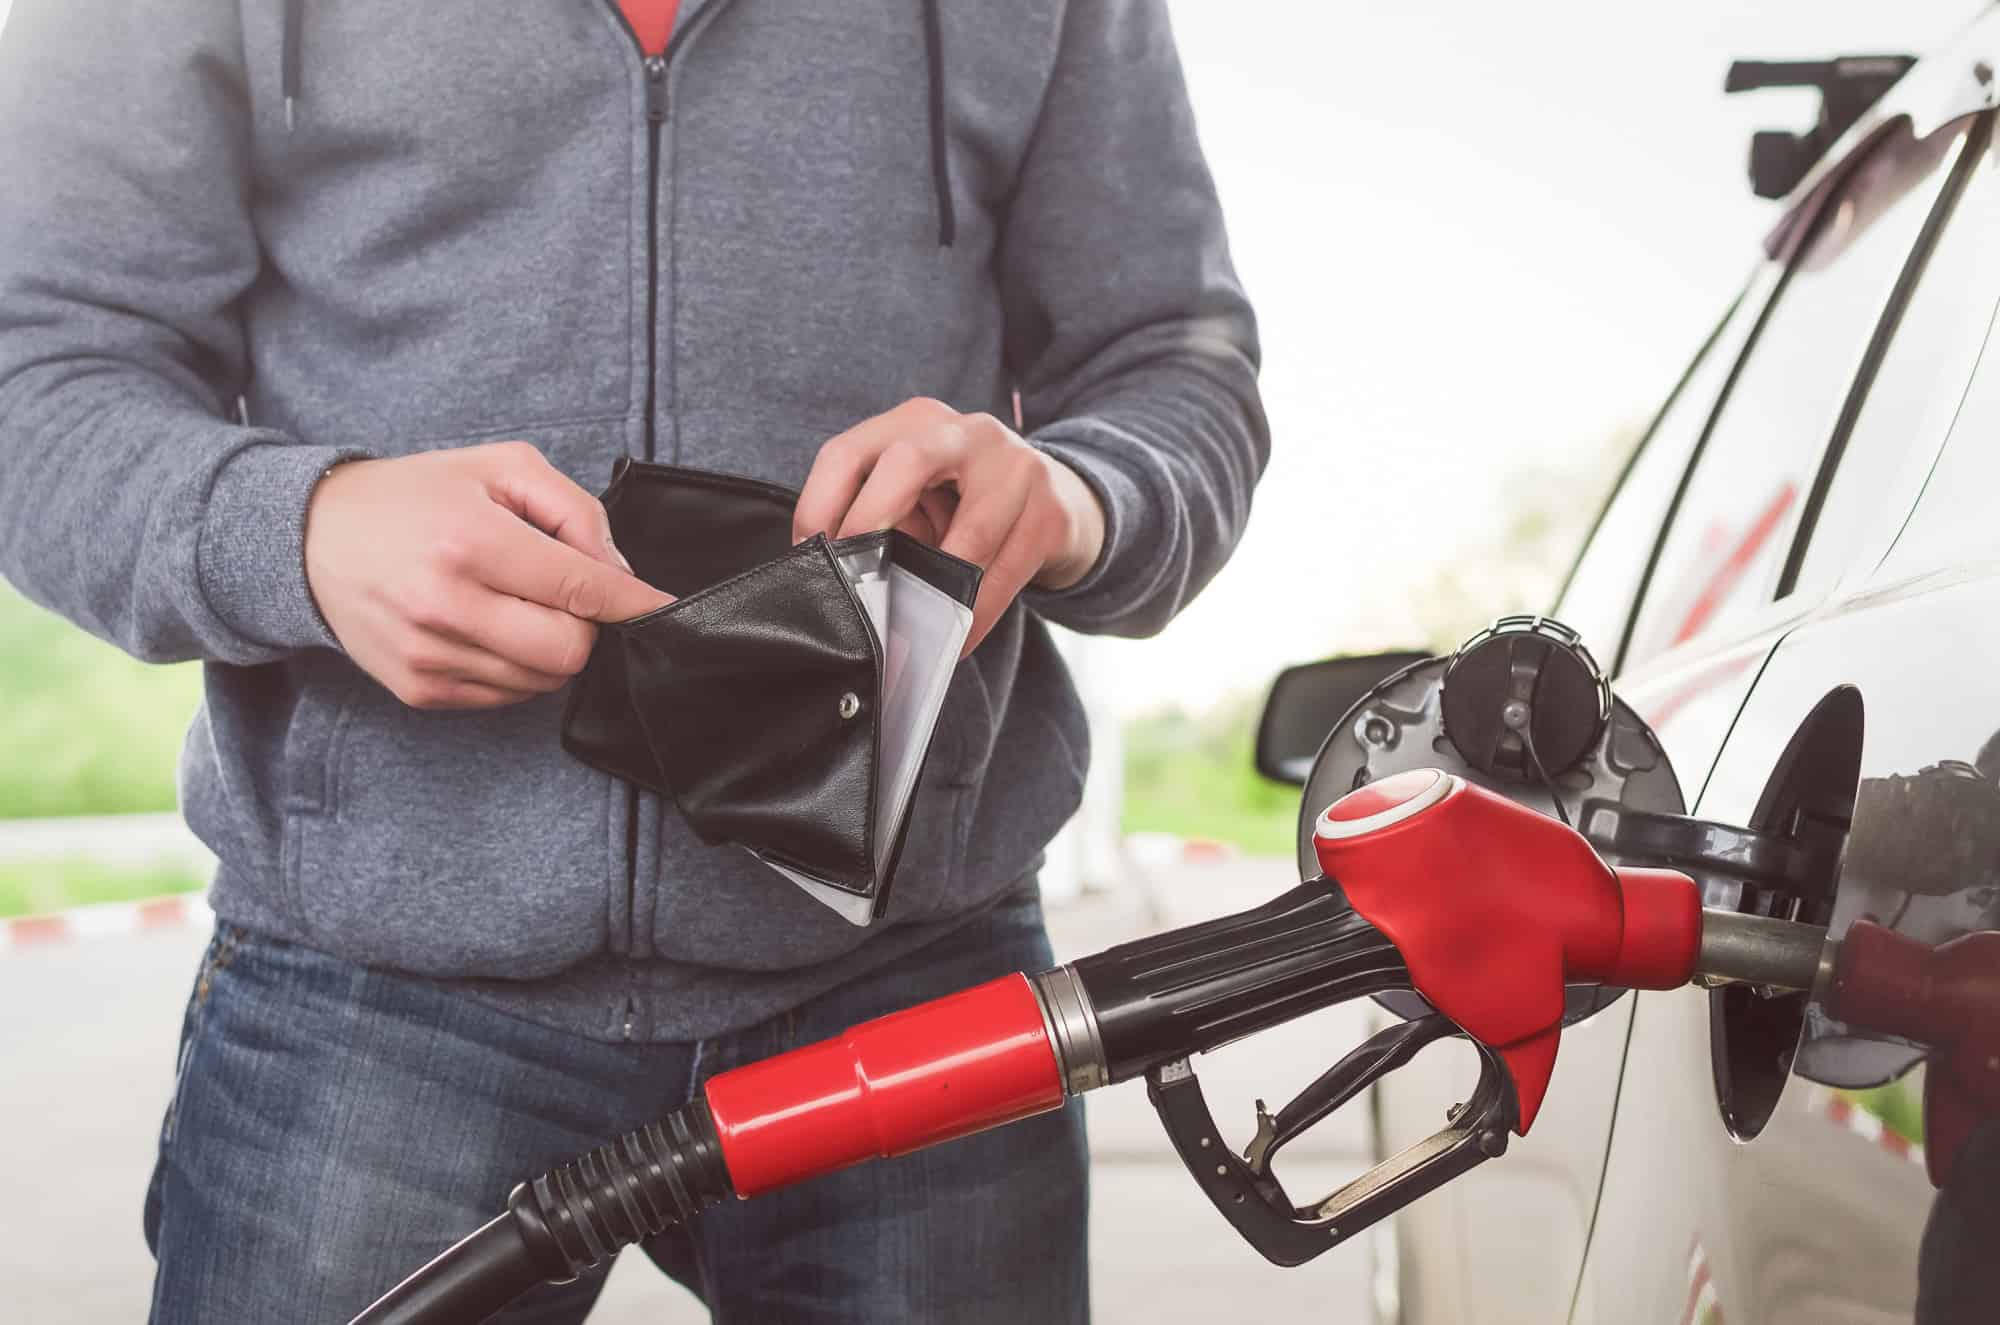 How to Get a Free Gas Voucher